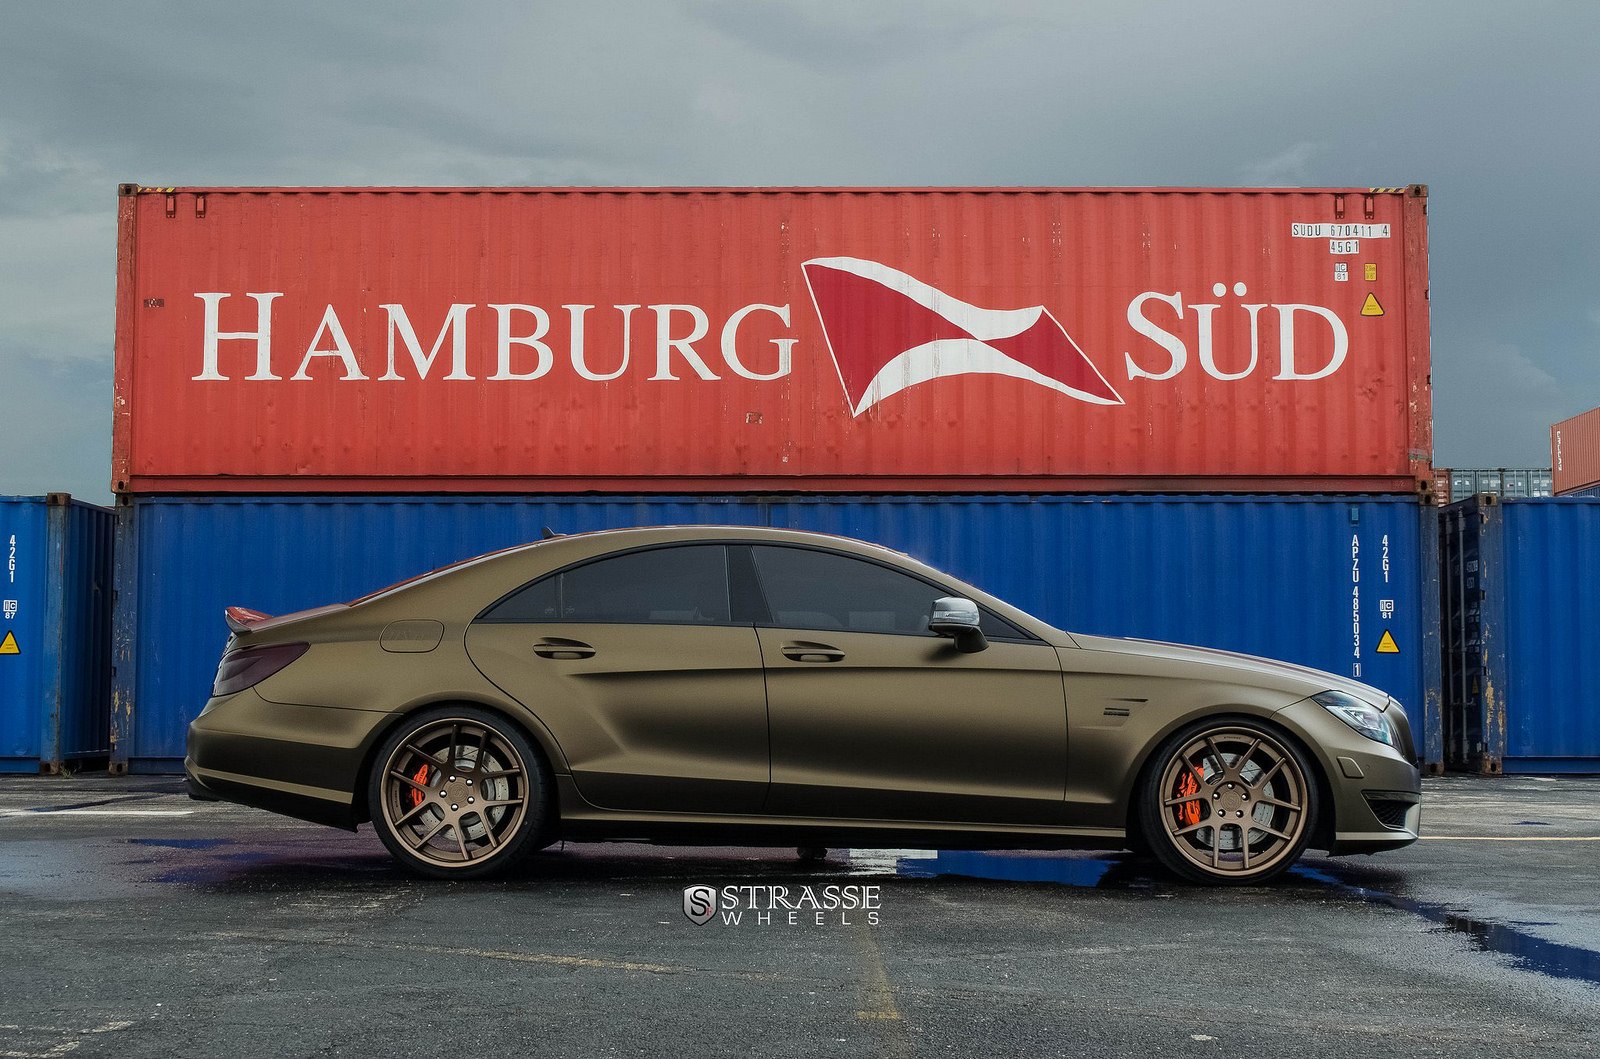 mercedes, Benz, Cls63, Amg, Strasse, Wheels, Tuning, Cars Wallpaper